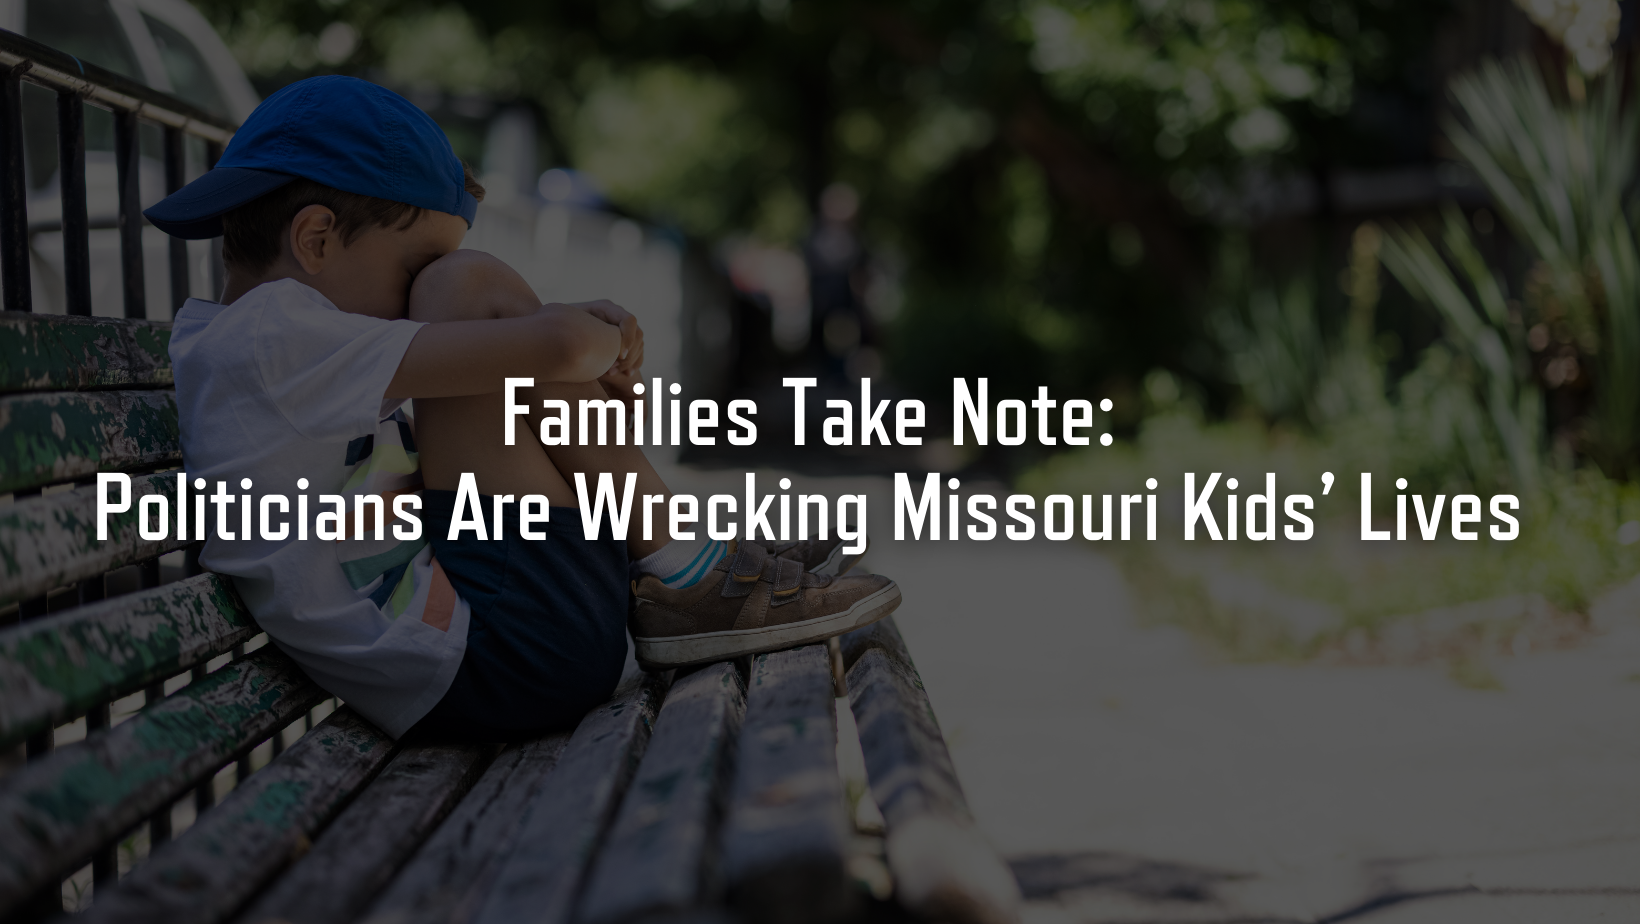 Graphic: Families Take Note: Politicians Are Wrecking Missouri Kids' Lives